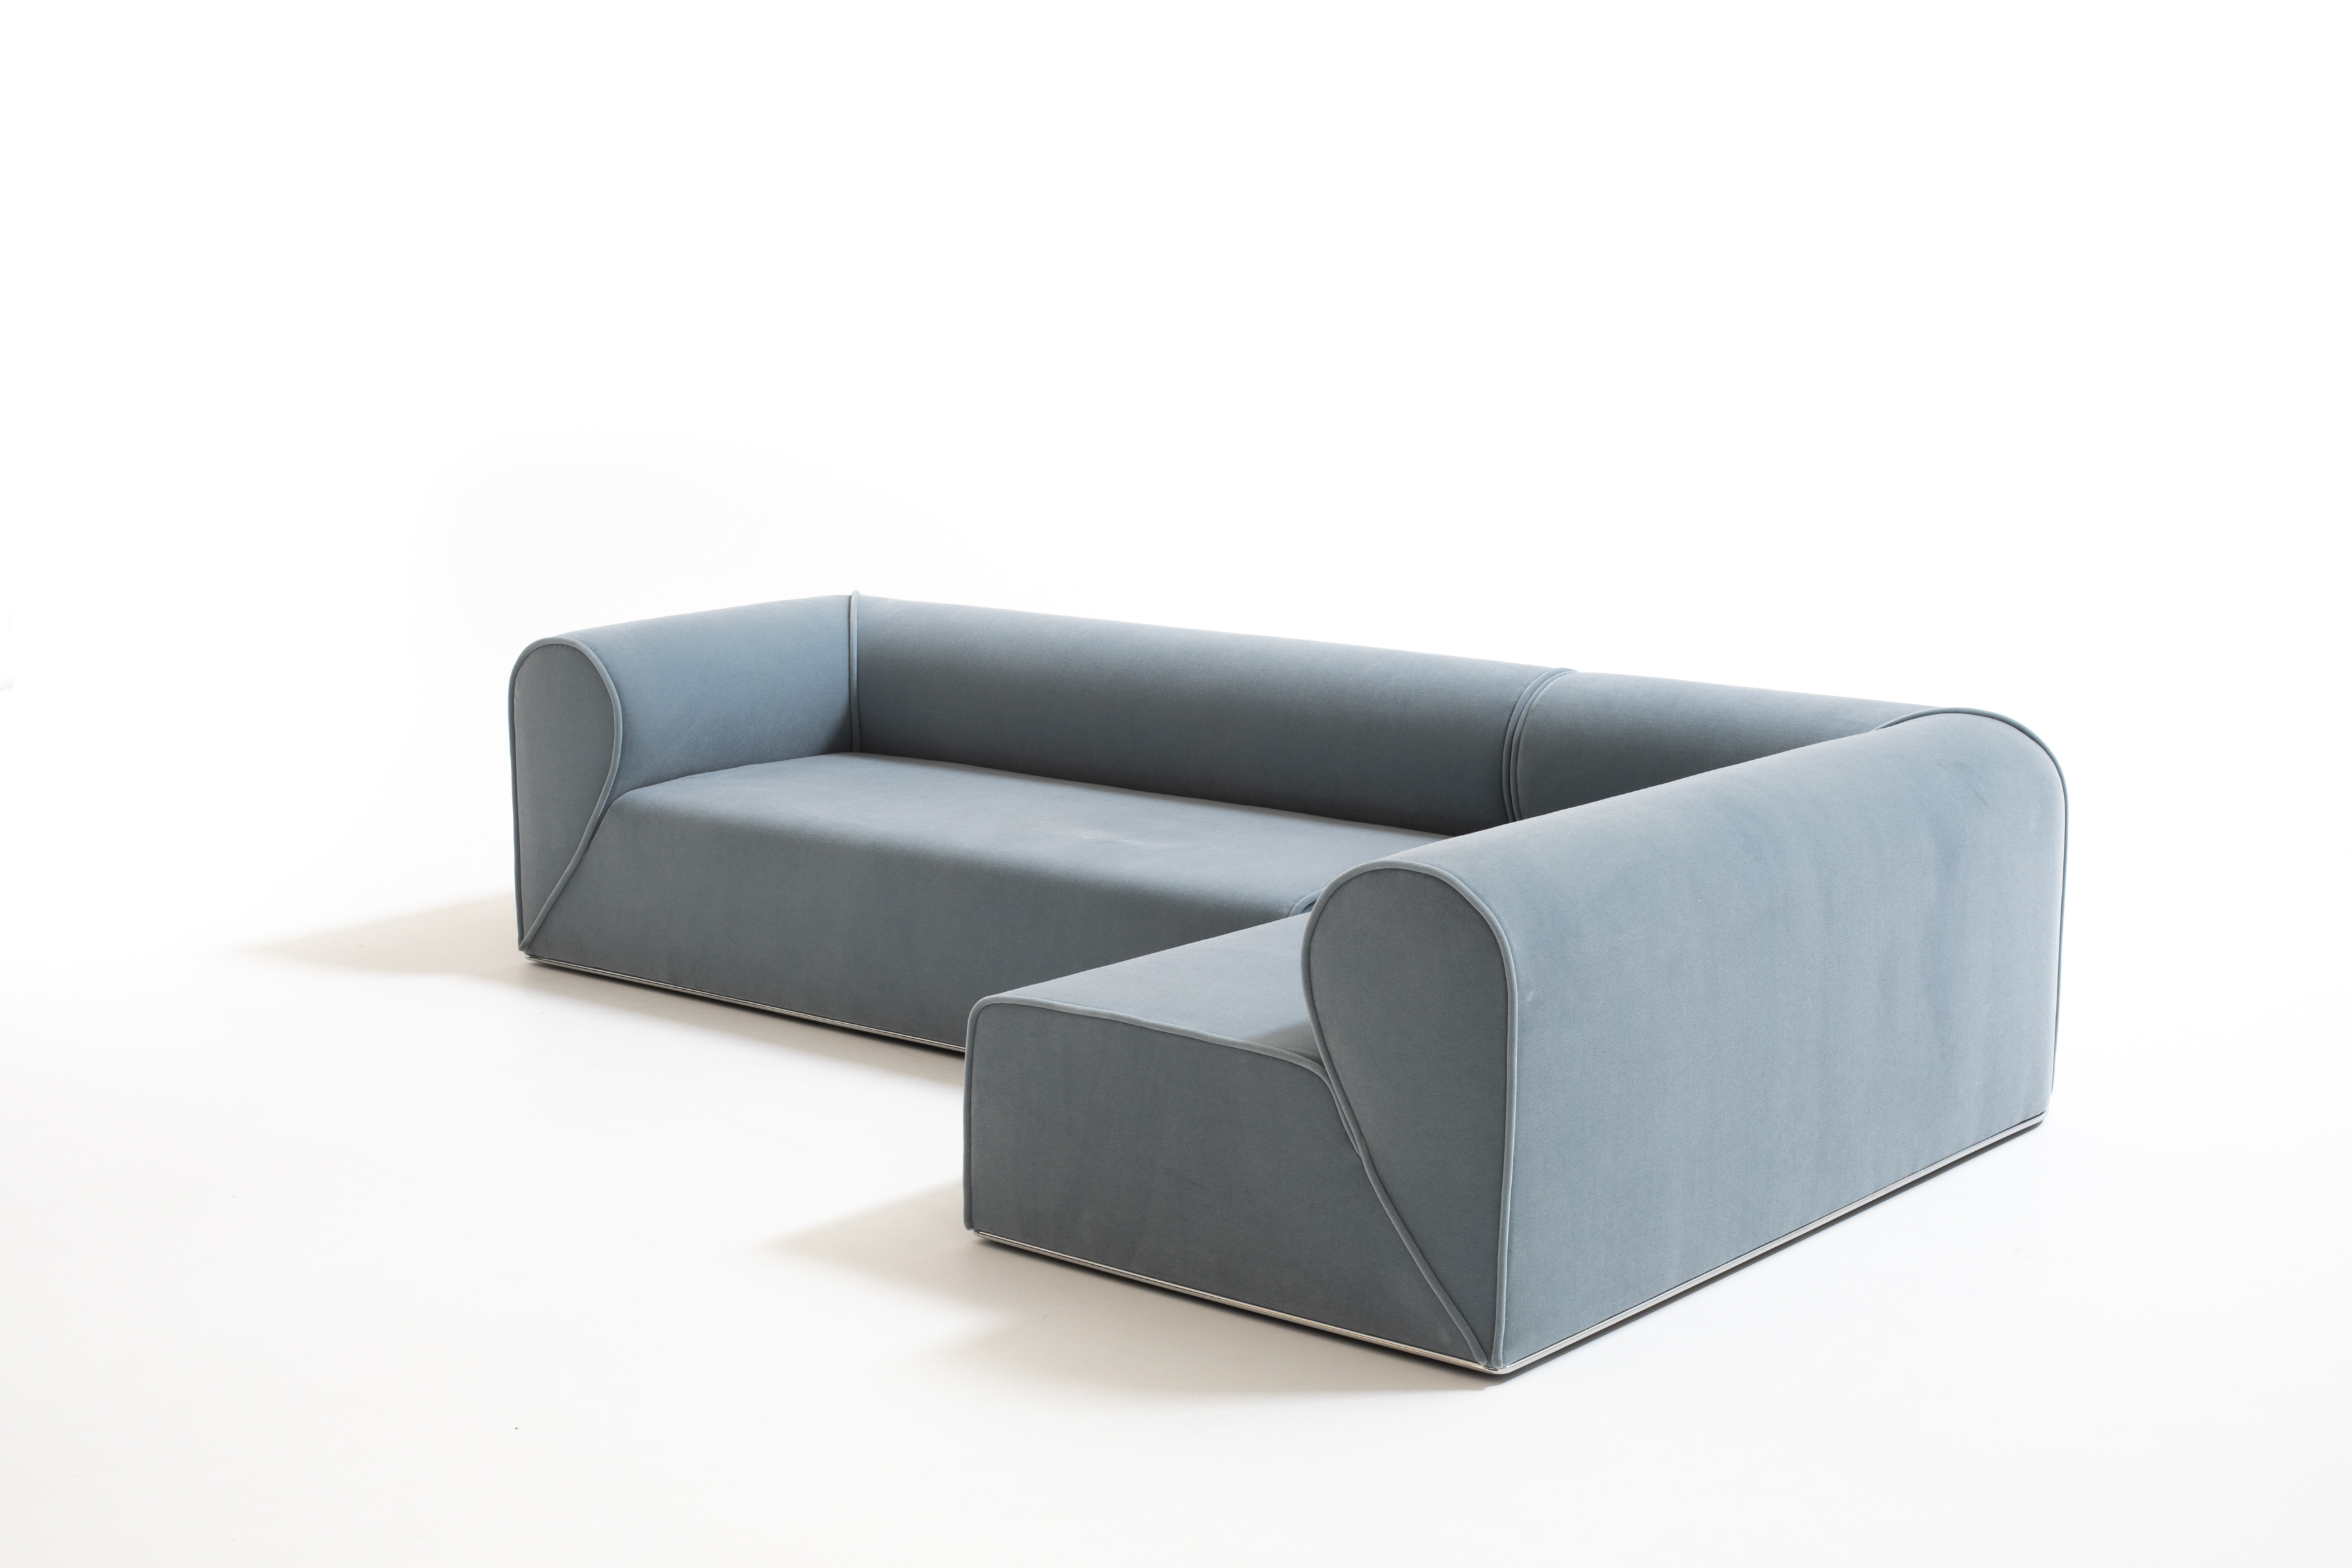 MUSE Design Winners - The Moroso Love Collection